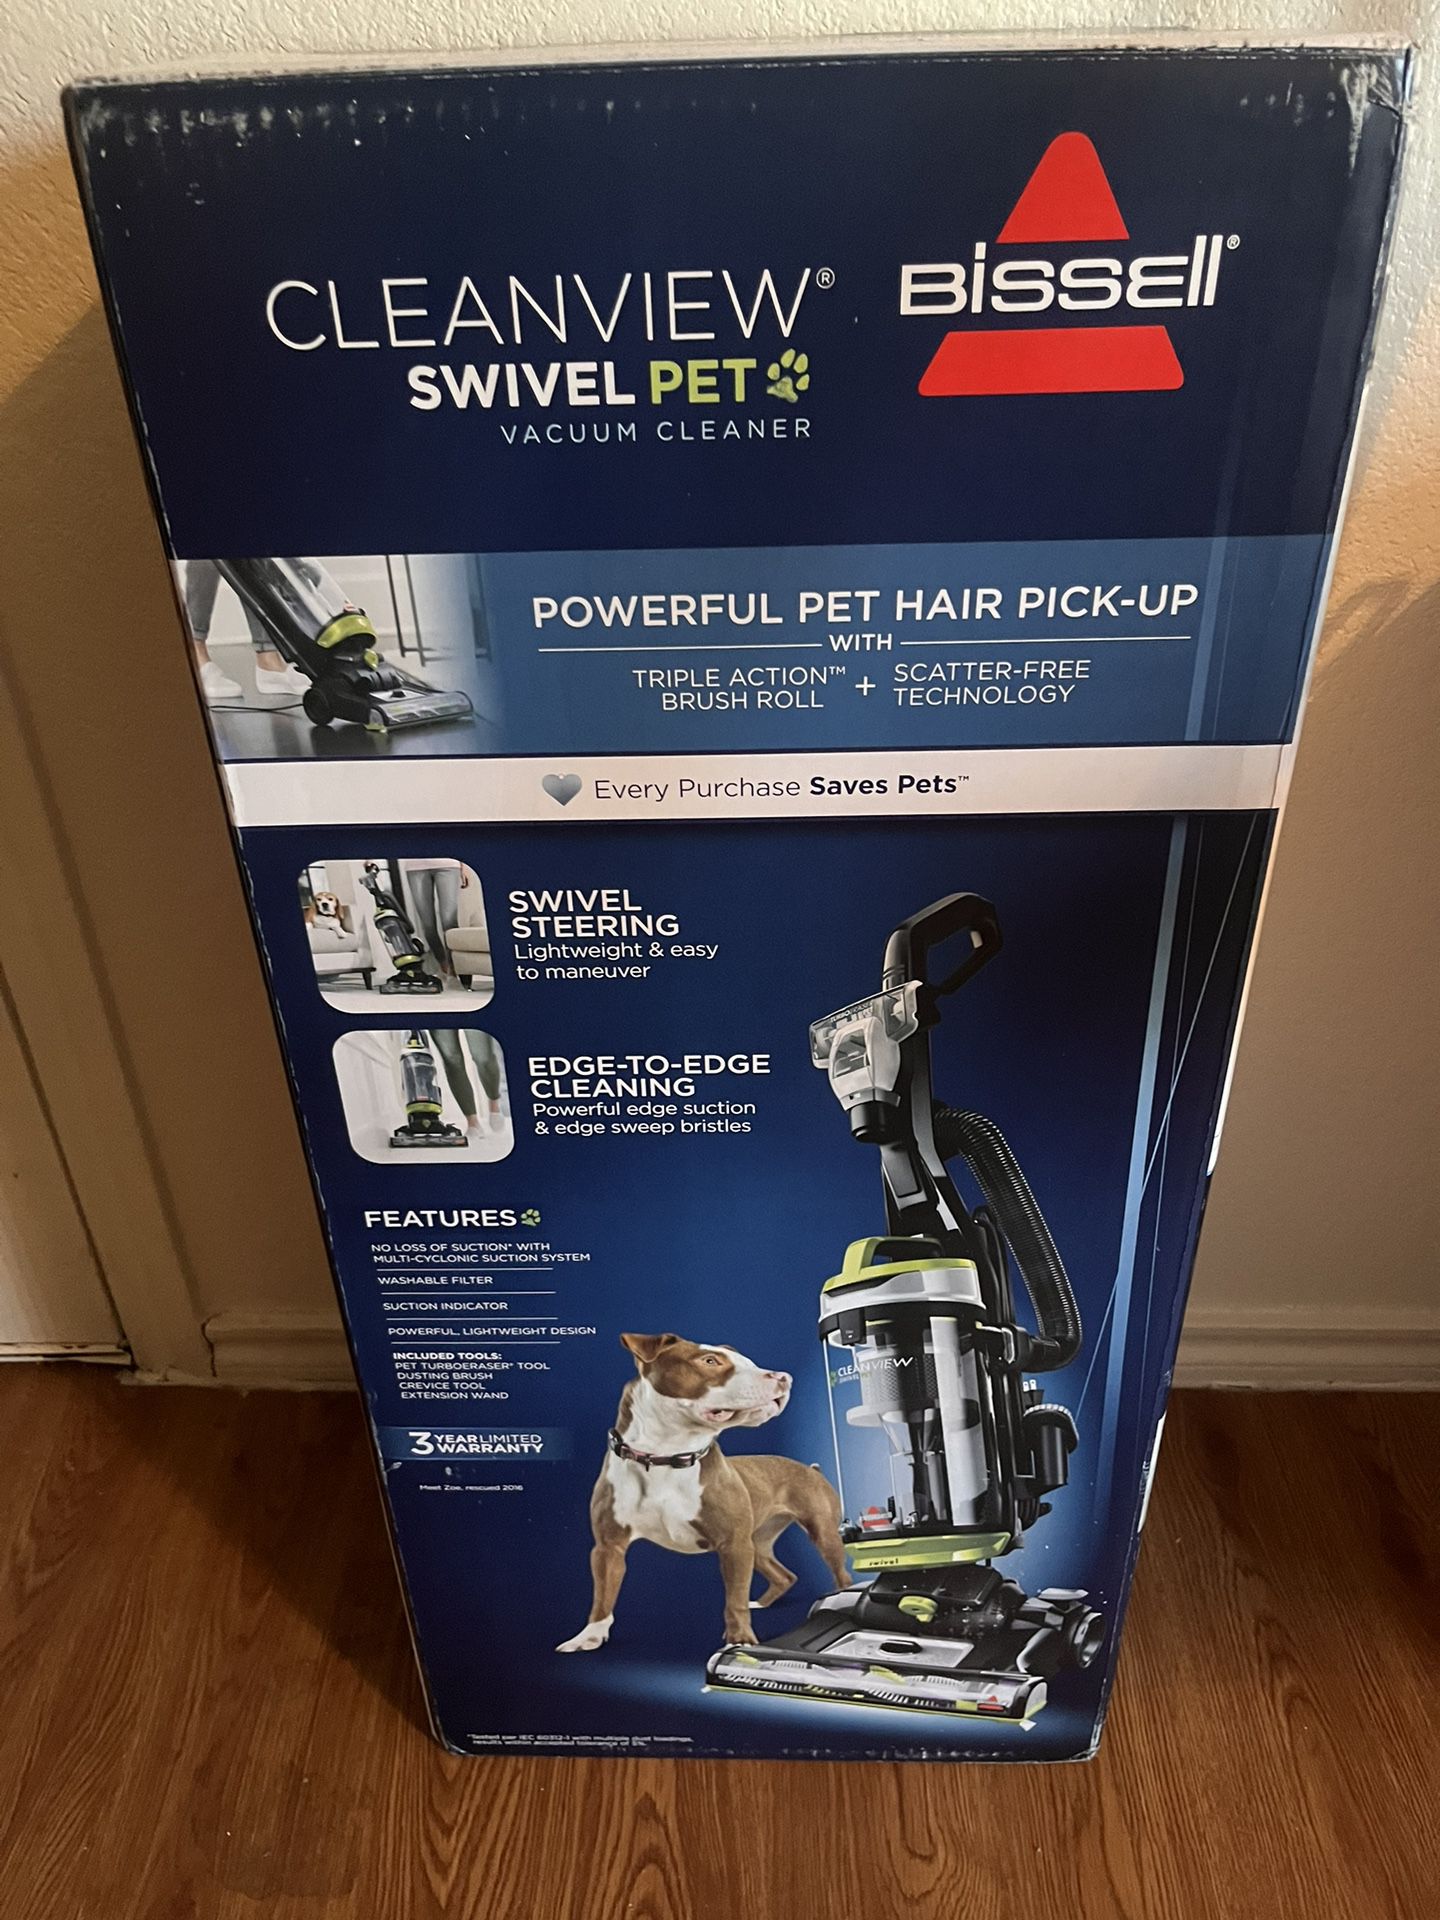 Bissell Vacuum-FIRM ON PRICE 